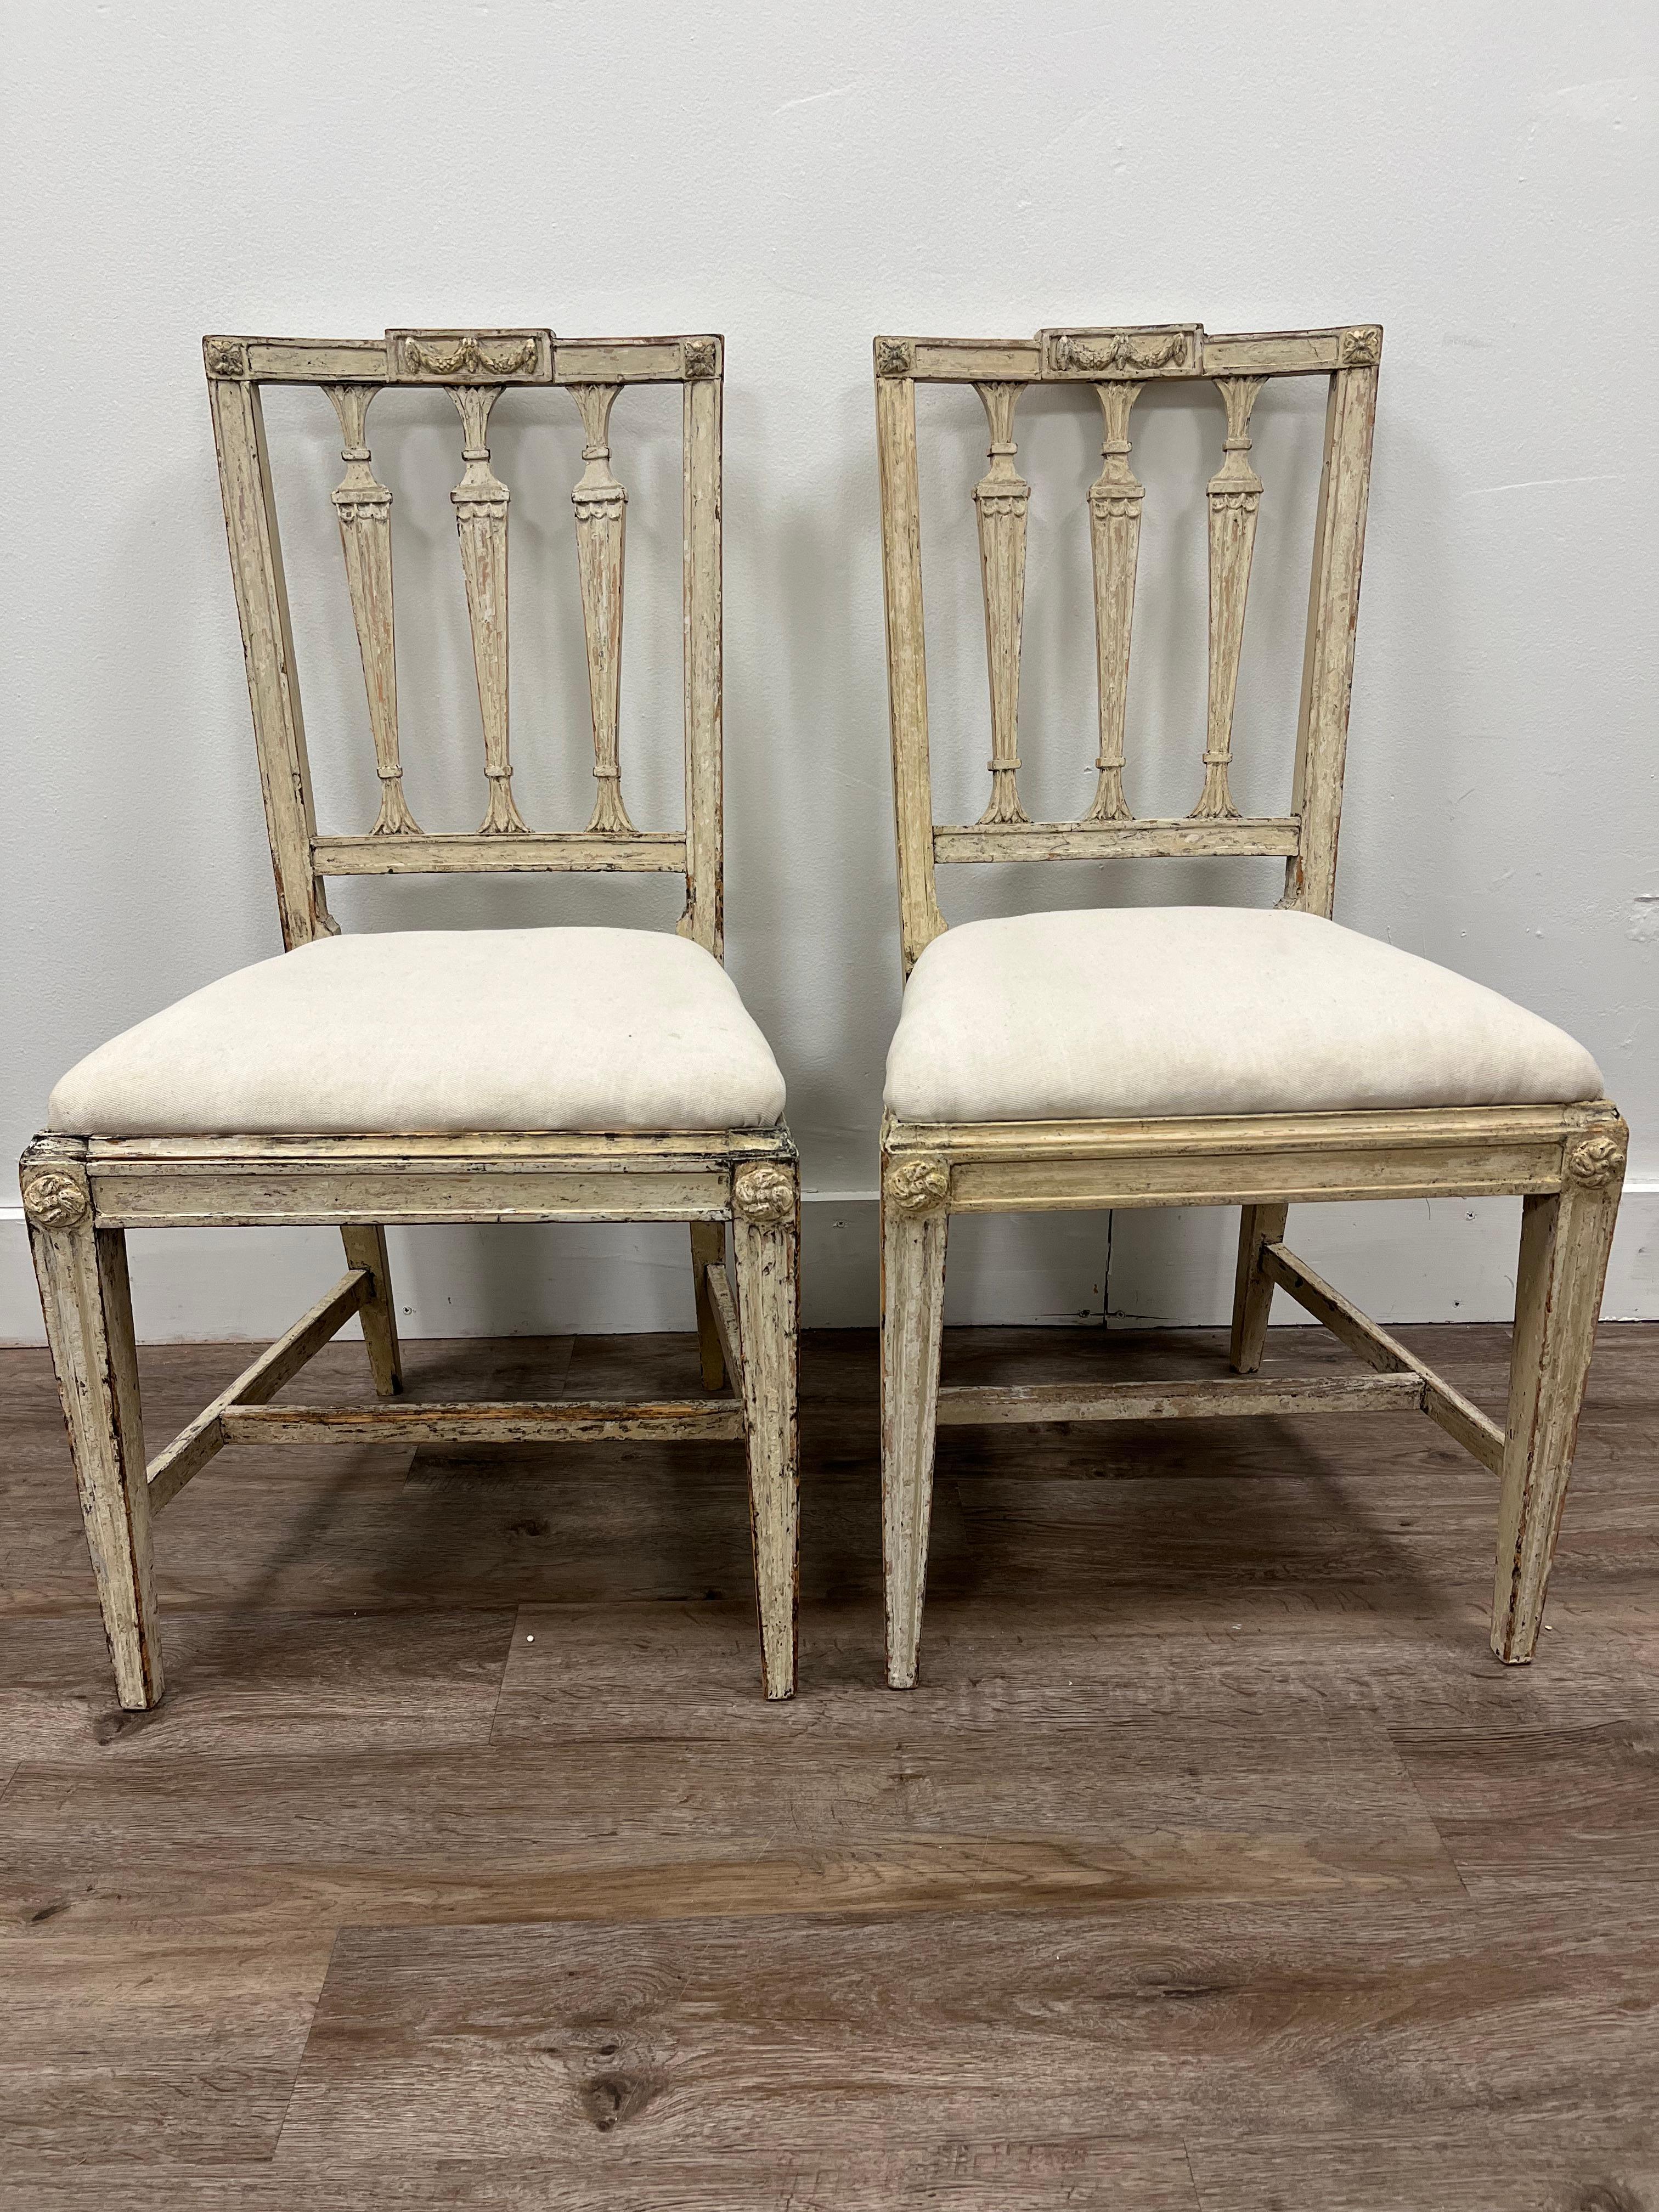 A pair of Gustavian chairs made in Stockholm by noted maker Johan Melchior Lundberg (active 1774 - 1812). One chair is signed MLB. Scraped to its well preserved original cream color. Original slip seats are reupholstered in linen.